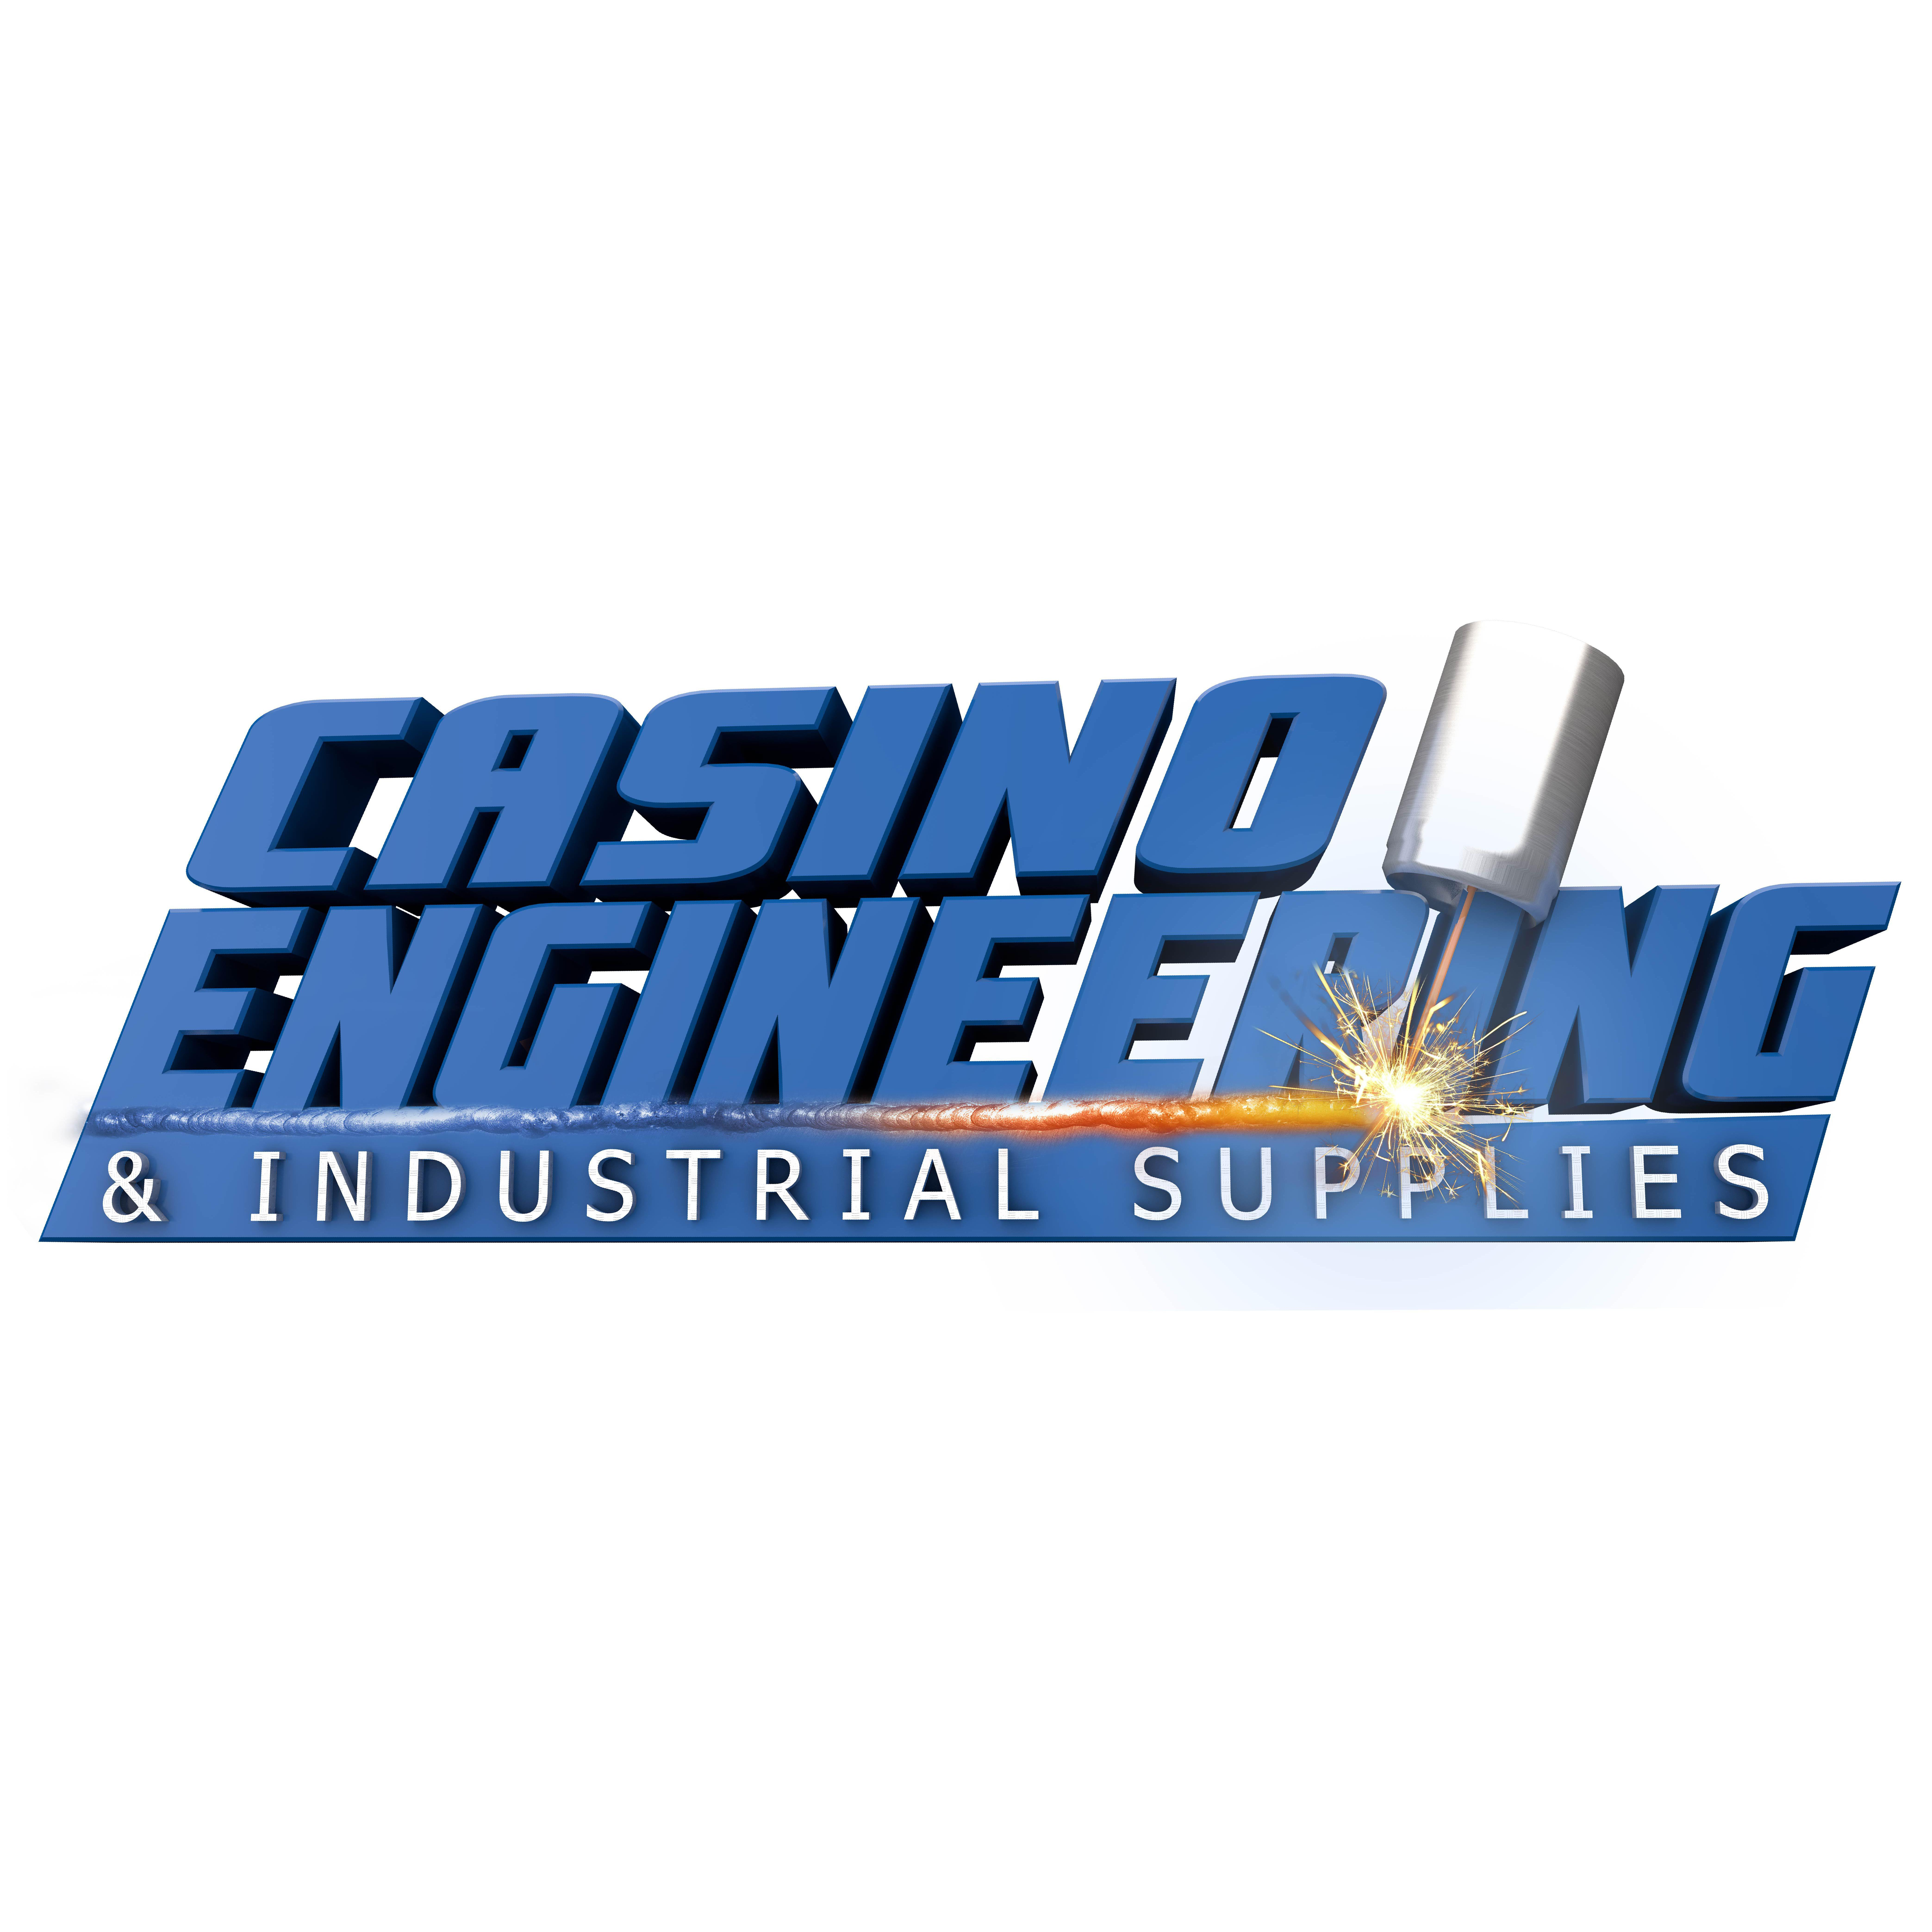 Casino Engineering and Industrial Supplies - Casino, NSW 2470 - (02) 6662 3855 | ShowMeLocal.com